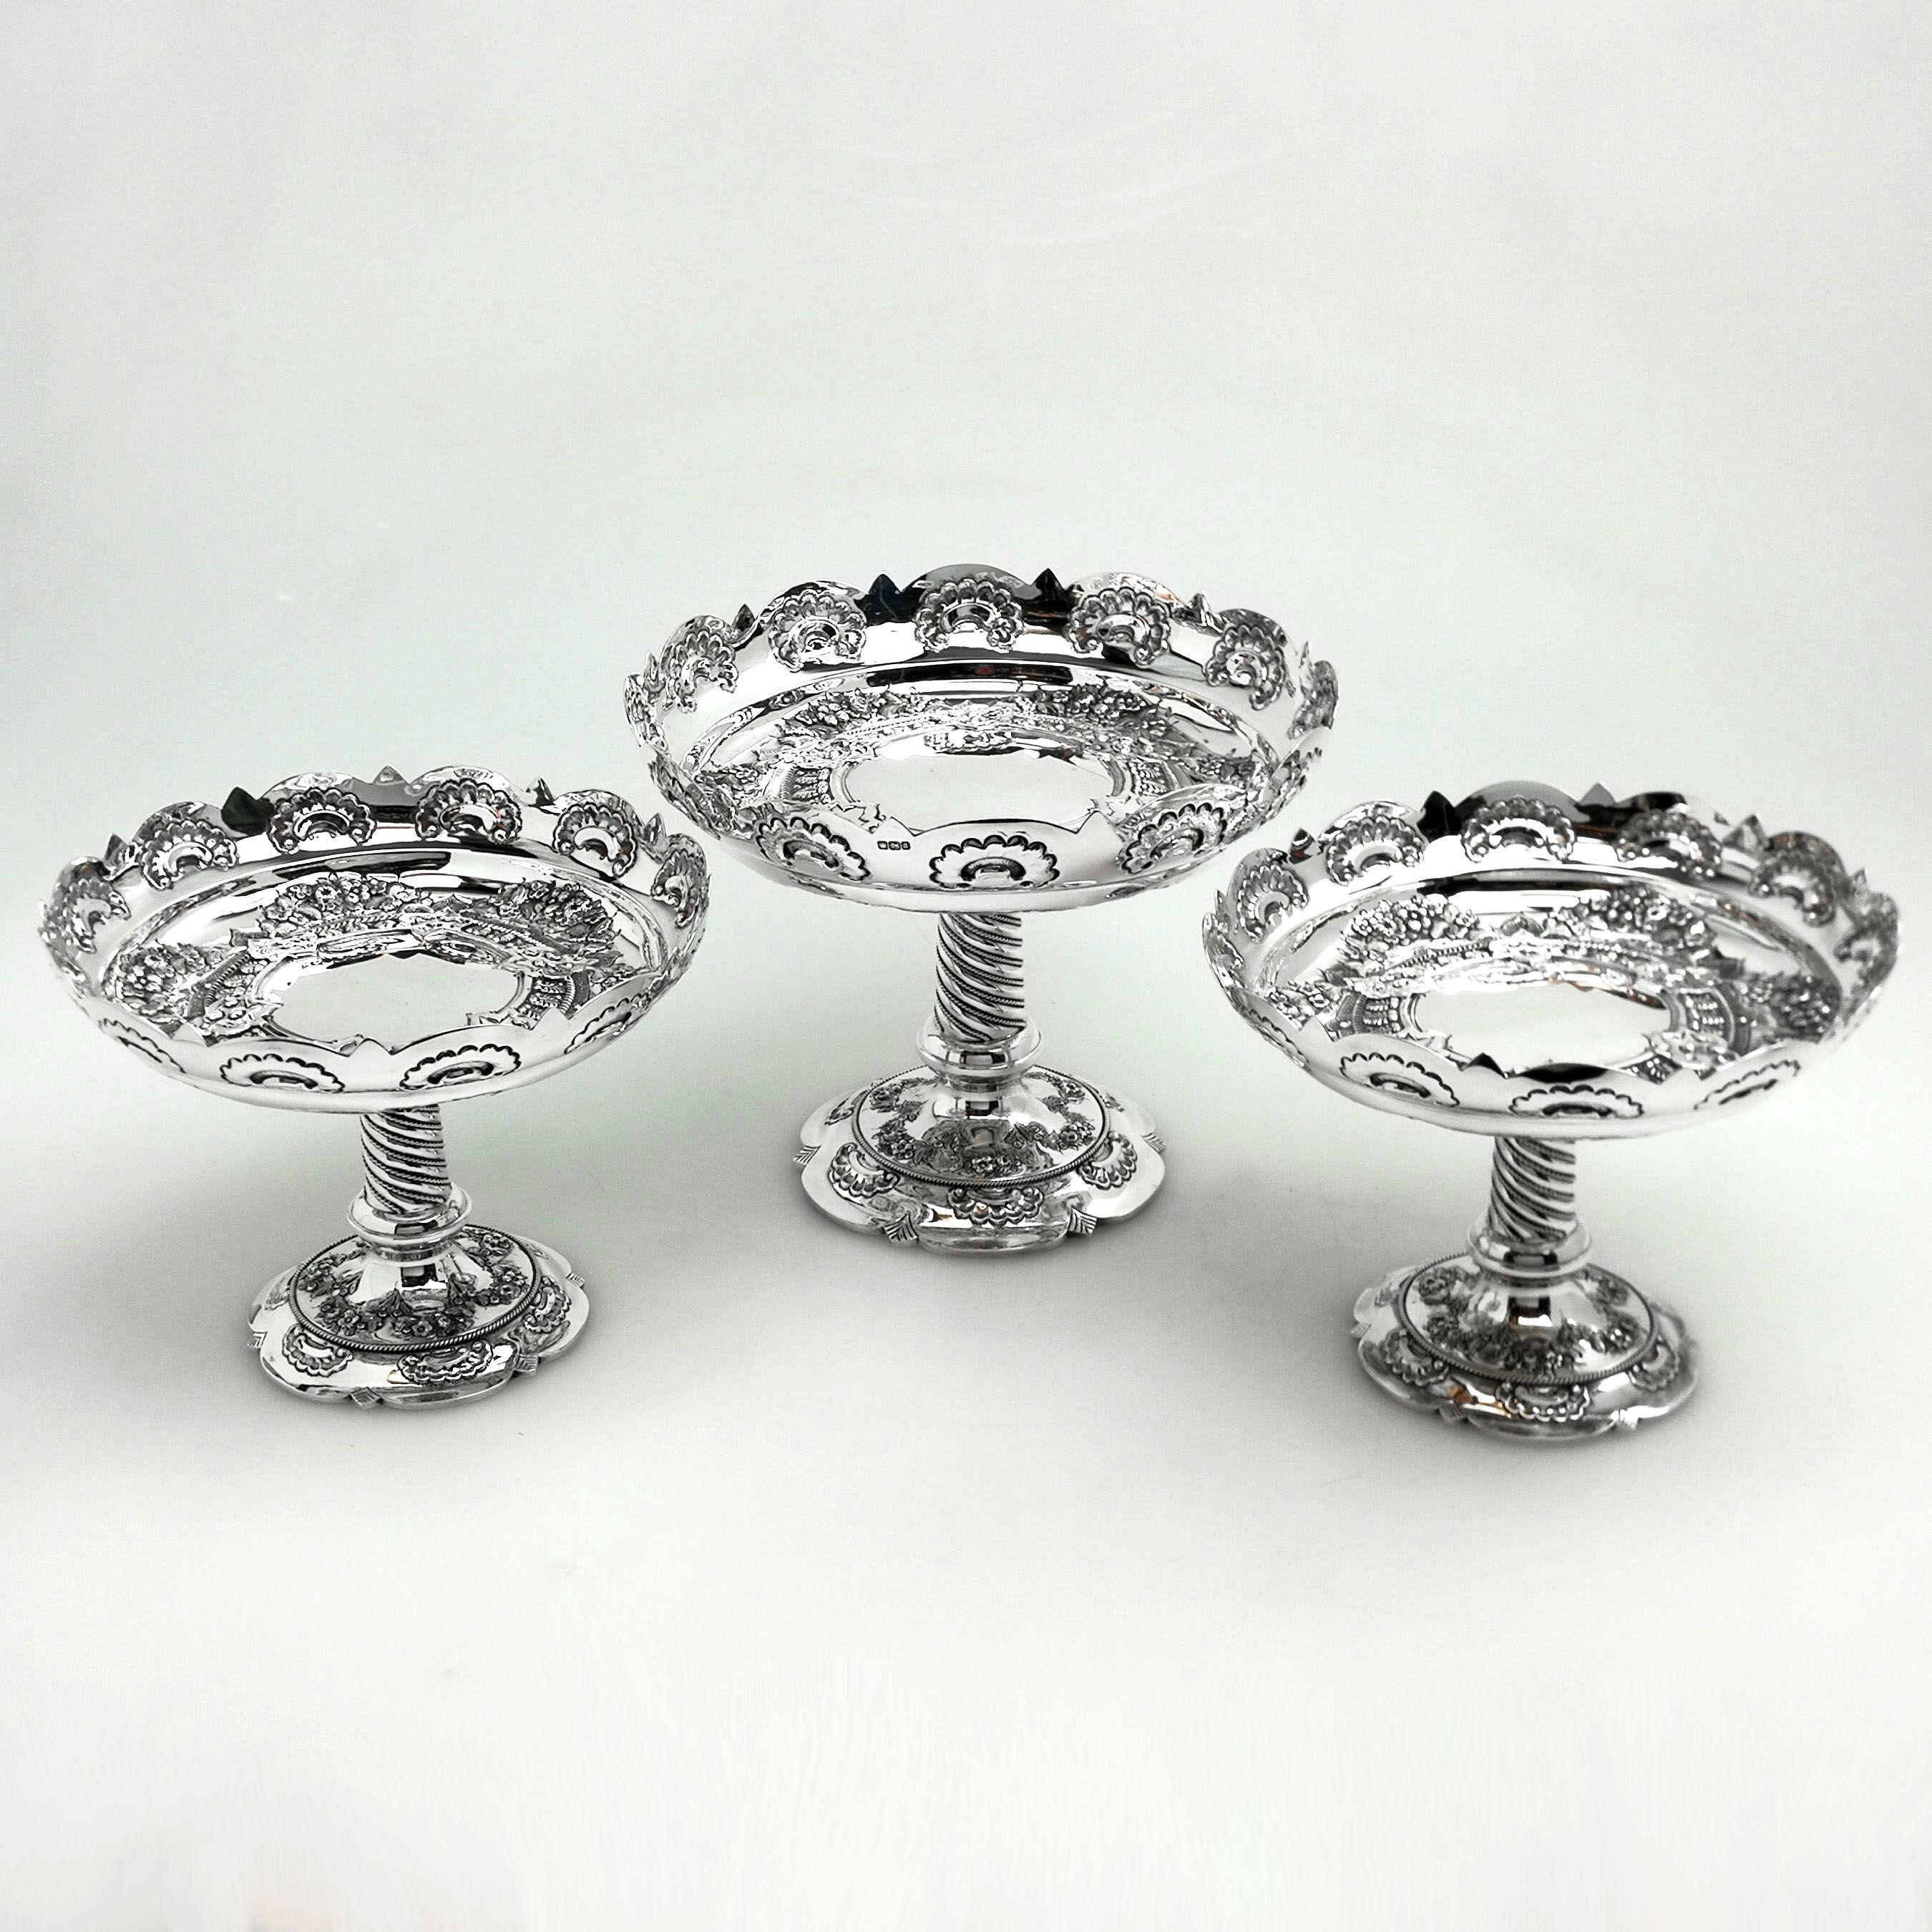 A lovely suite of 3 Antique Victorian solid Silver Comports / Dishes comprising of one large Dish and two matched smaller Dishes. This set of three Dishes has elegant flat chased bowls on tall chased columns on top of a spread pedestal foot.
 
 Made